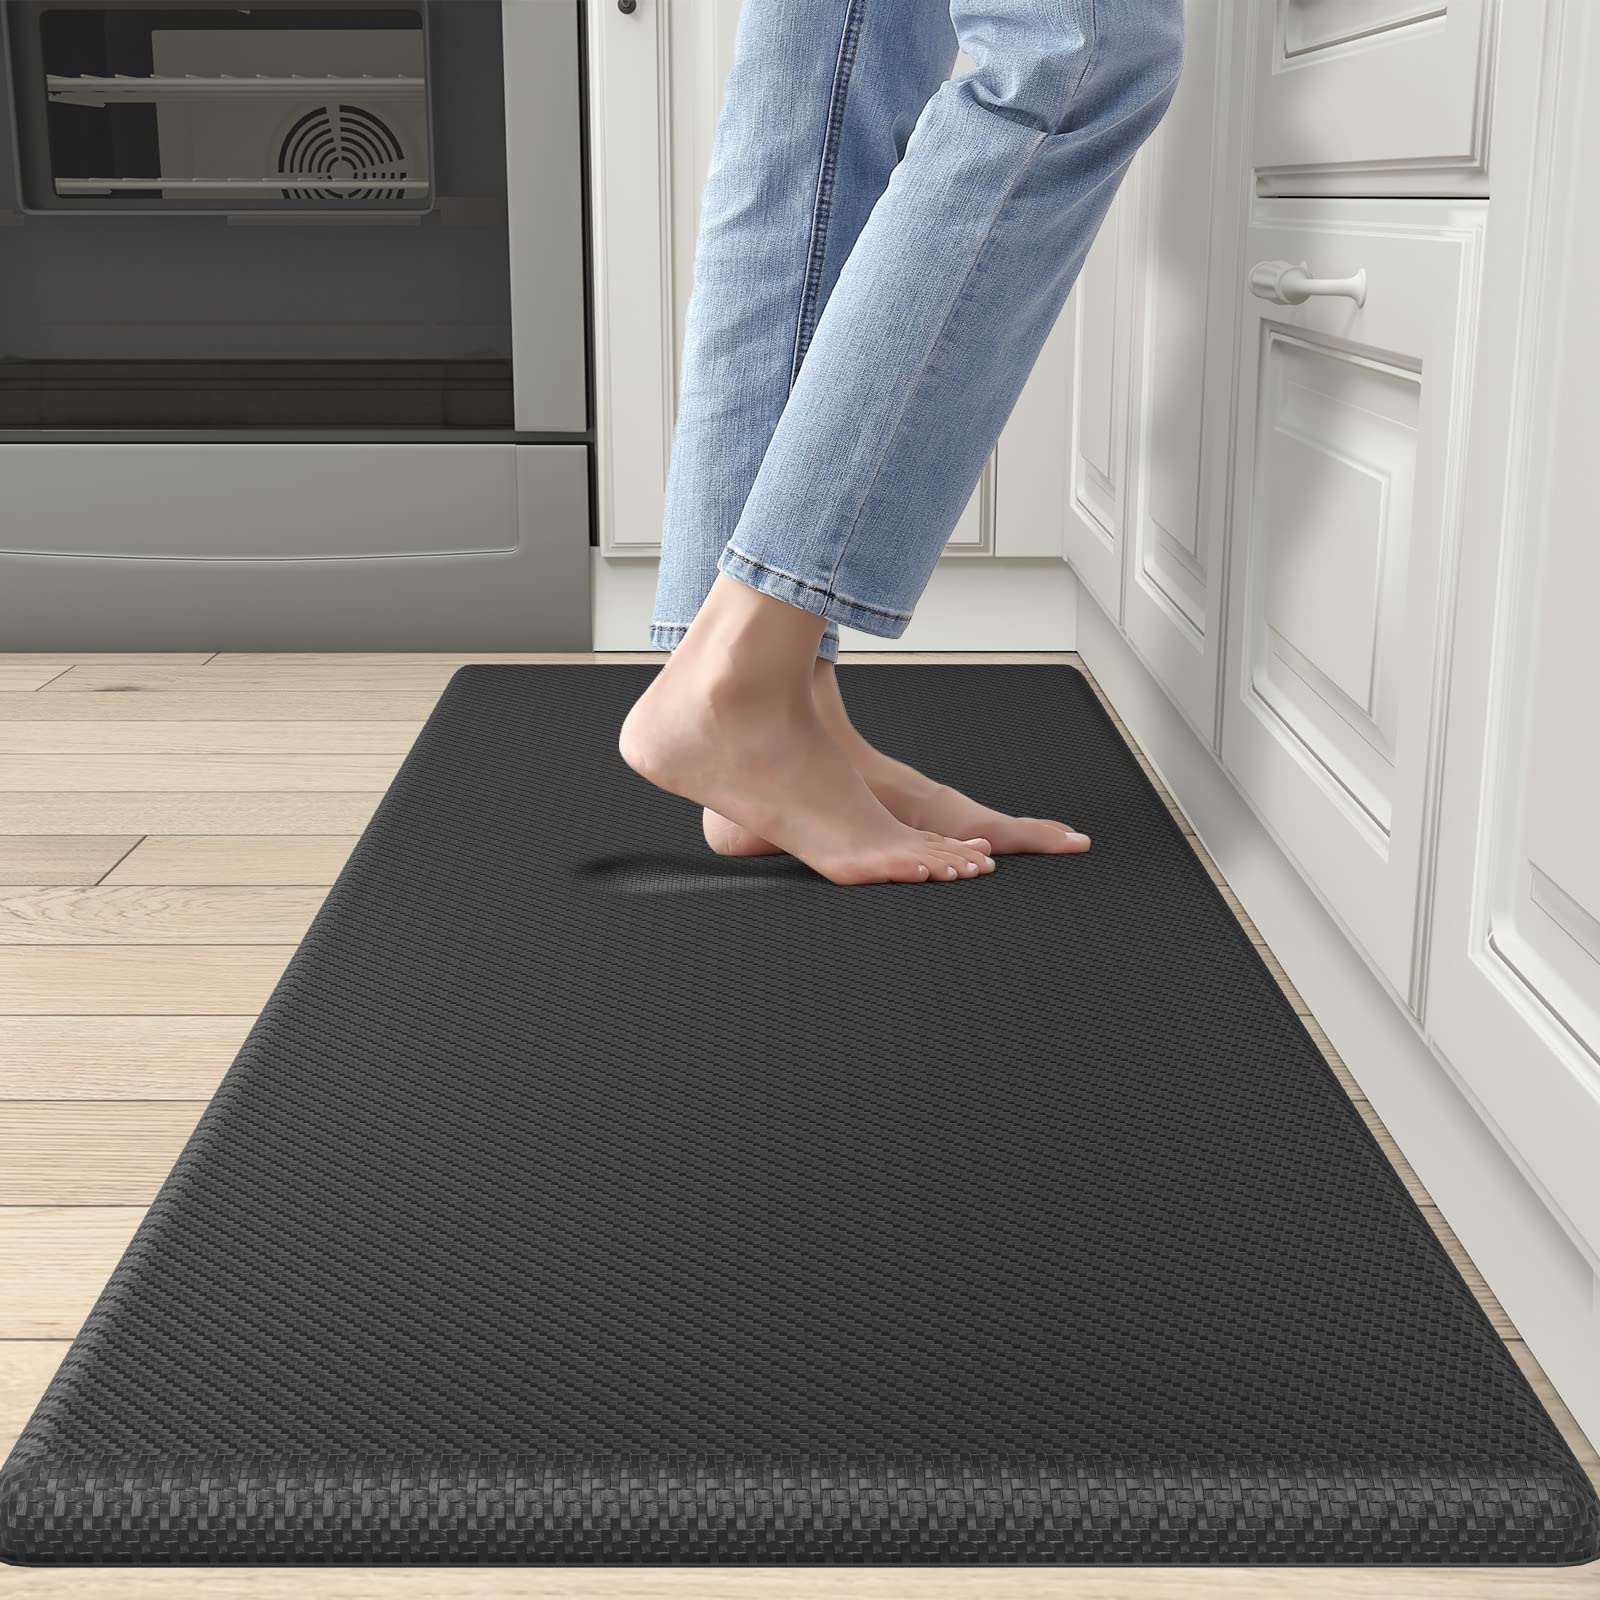 DEXI Anti Fatigue Kitchen Mat, 34 Inch Thick, Stain Resistant, Padded  cushioned Memory Foam Floor comfort Mat for Home, garage a